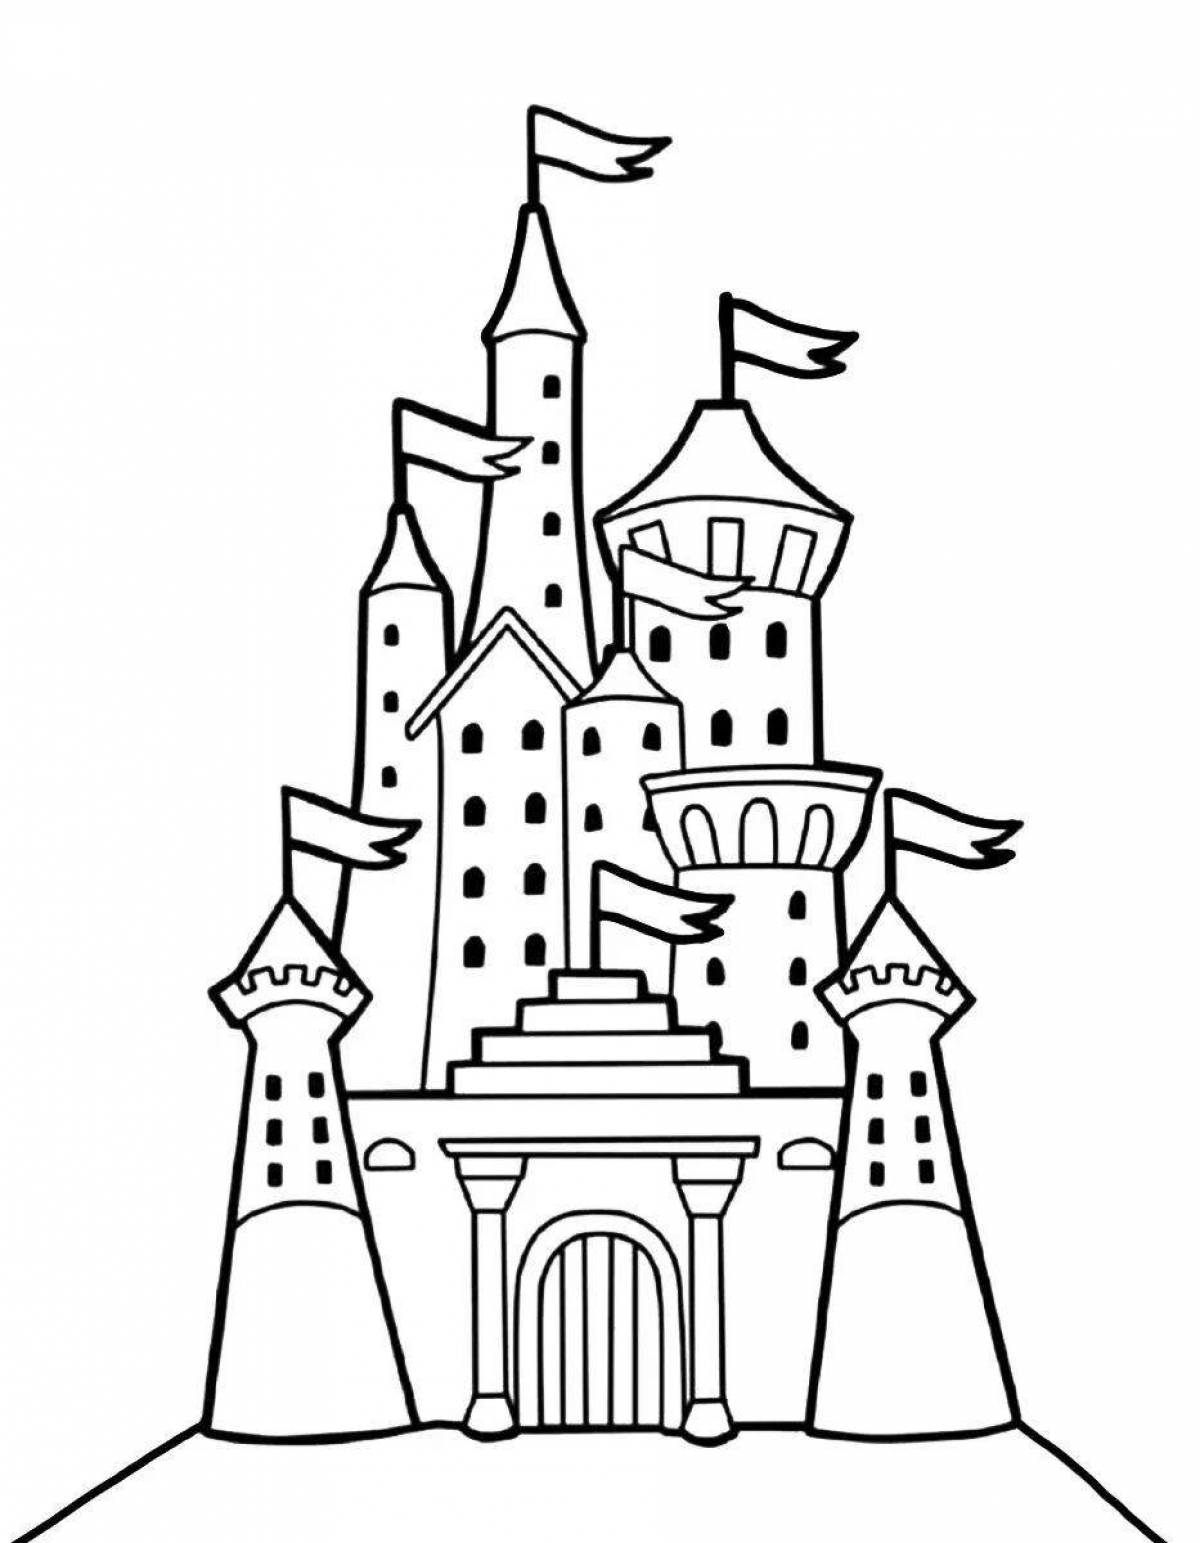 Coloring book glowing fairytale castle